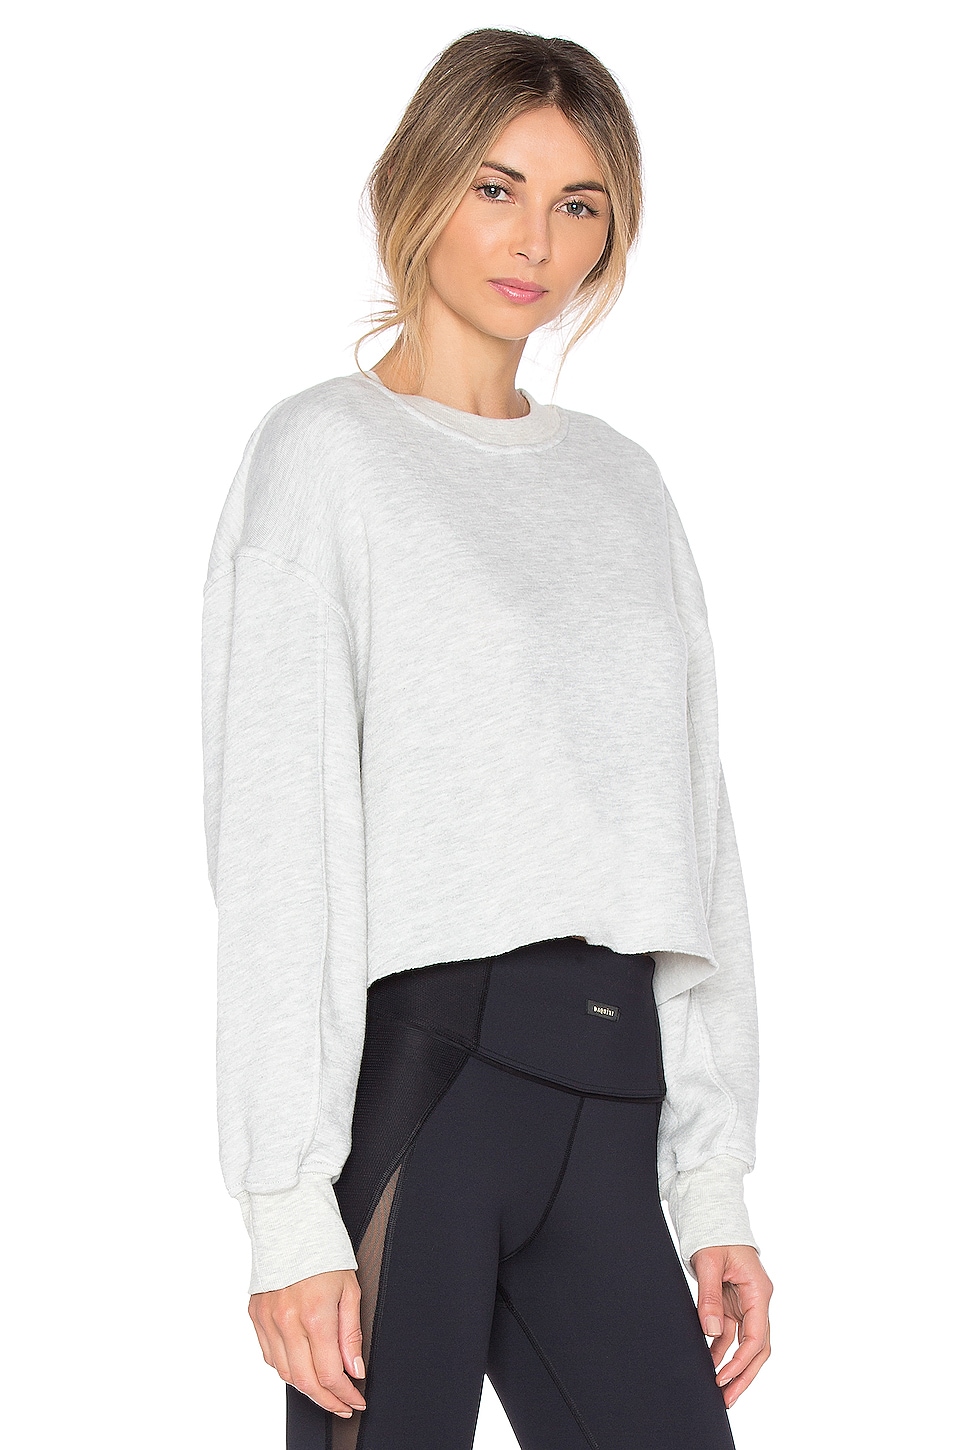 STRUT-THIS The Sonoma Sweatshirt in Grey French Terry | REVOLVE